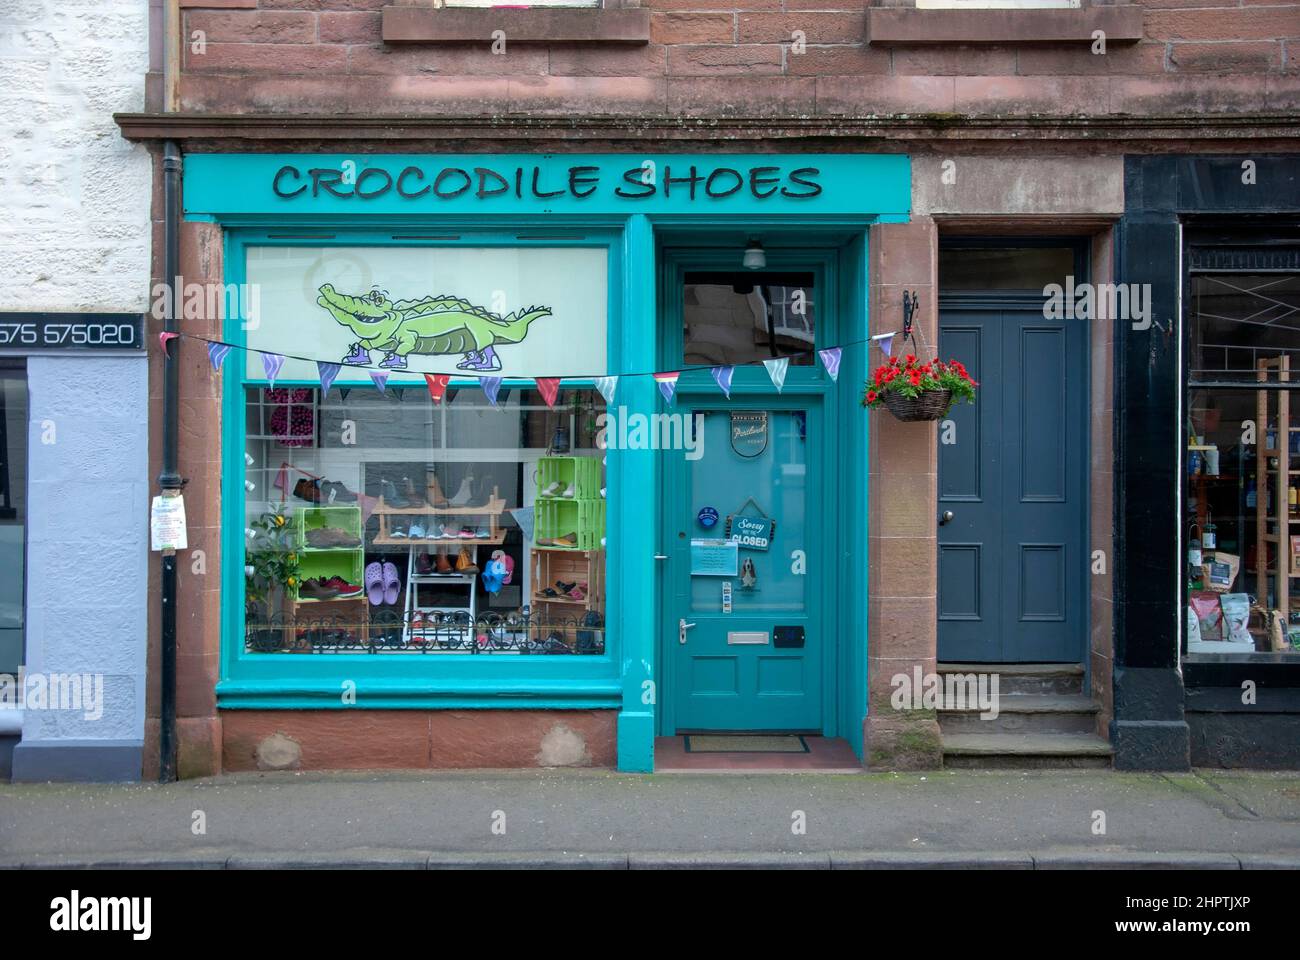 Crocodile Shoes Shoe Shop Bank Street Kirriemuir Angus Scotland United Kingdom exterior view red sandstone turquoise teal blue painted commercial reta Stock Photo